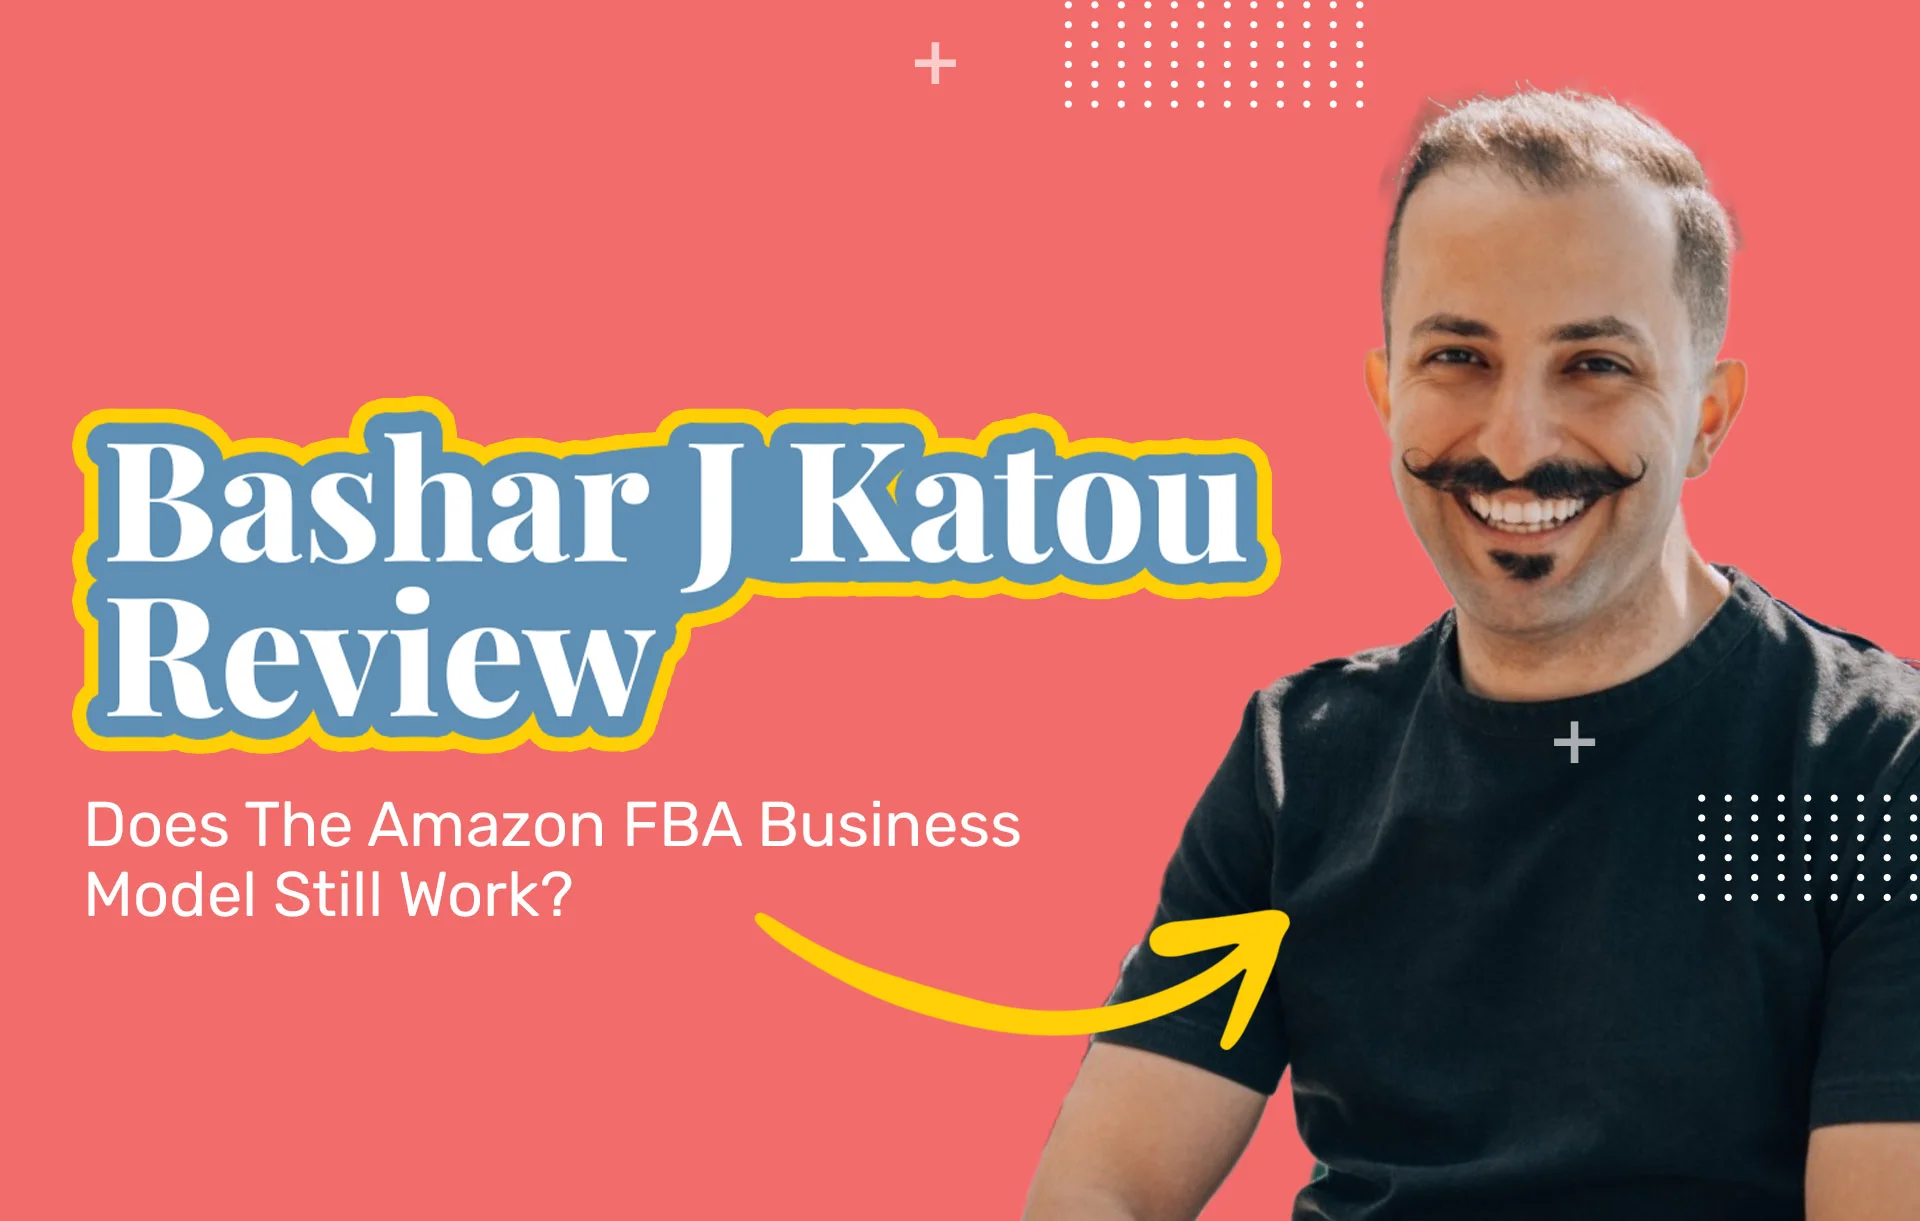 Bashar J Katou Review (2023 Update): Does The Amazon FBA Business Model Still Work?